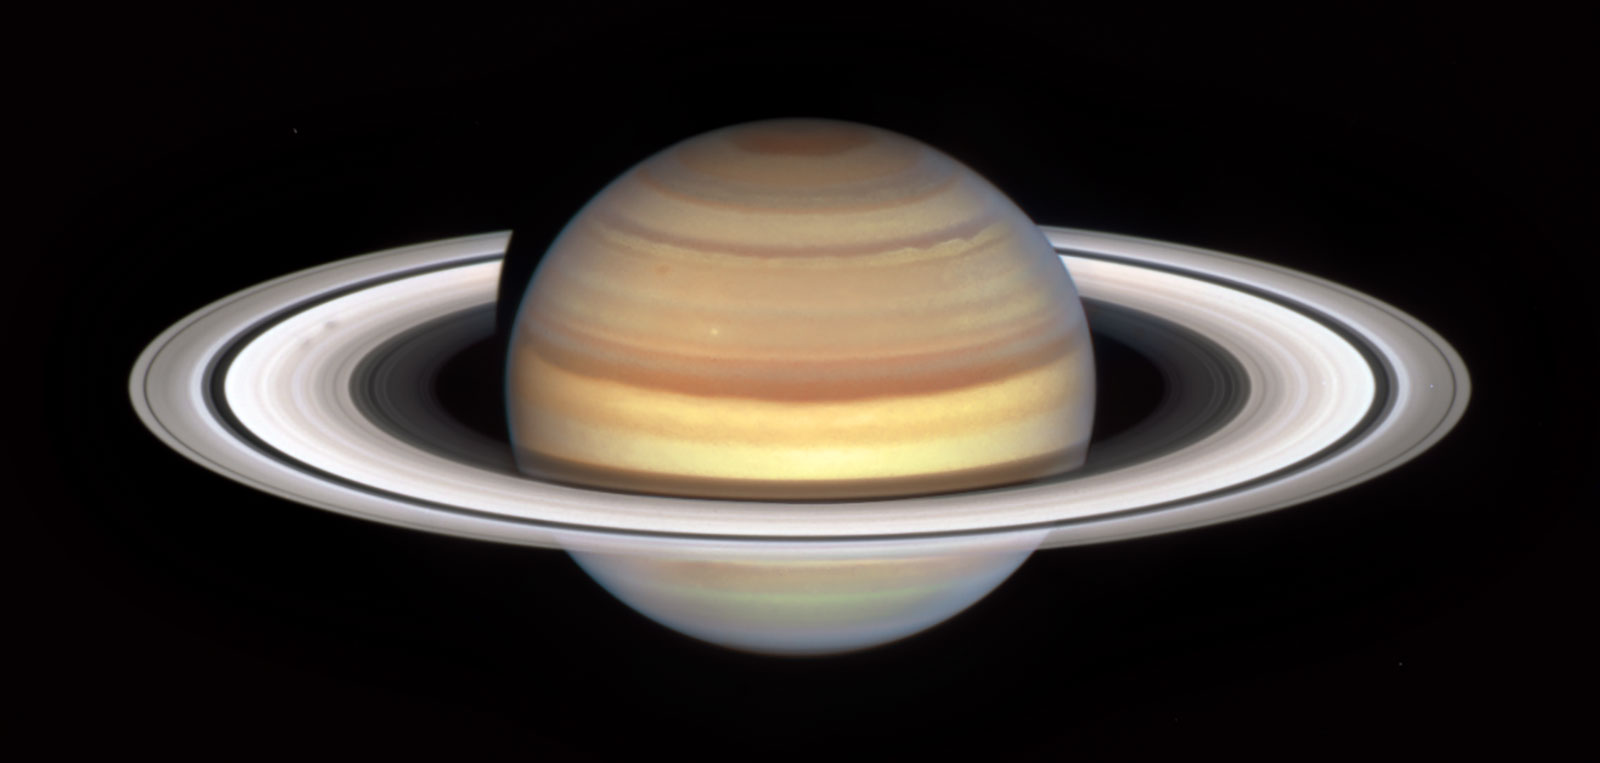 An image captured by NASA's Hubble Space Telescope's marks the start of Saturn's "spoke season," wi...